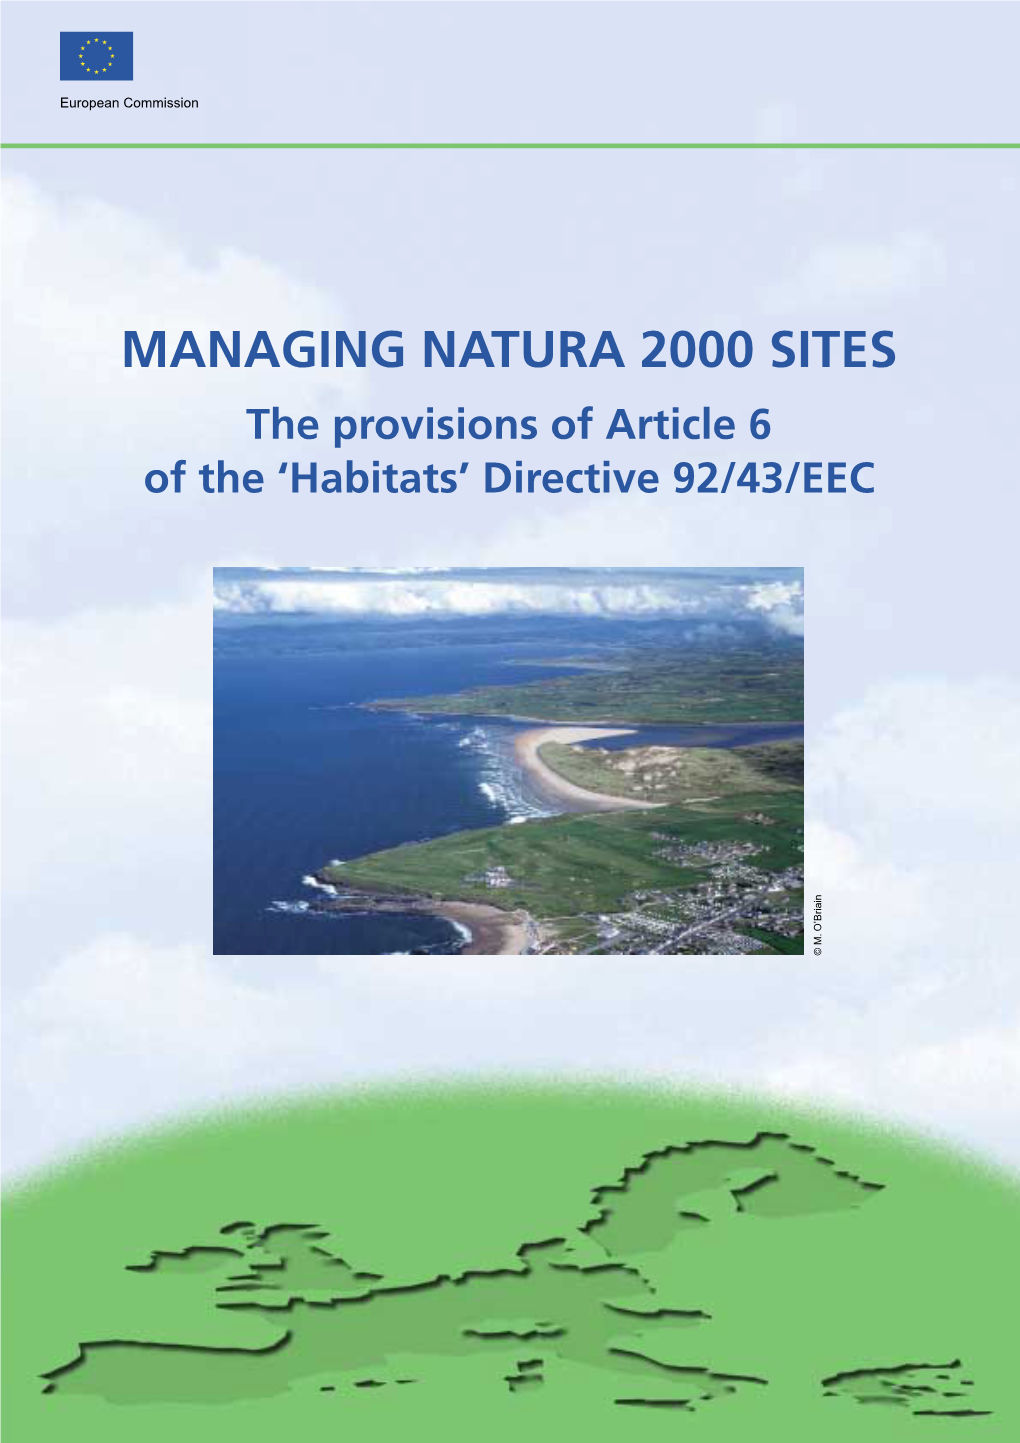 Managing Natura 2000 Sites the Provisions of Article 6 of the 'Habitats'